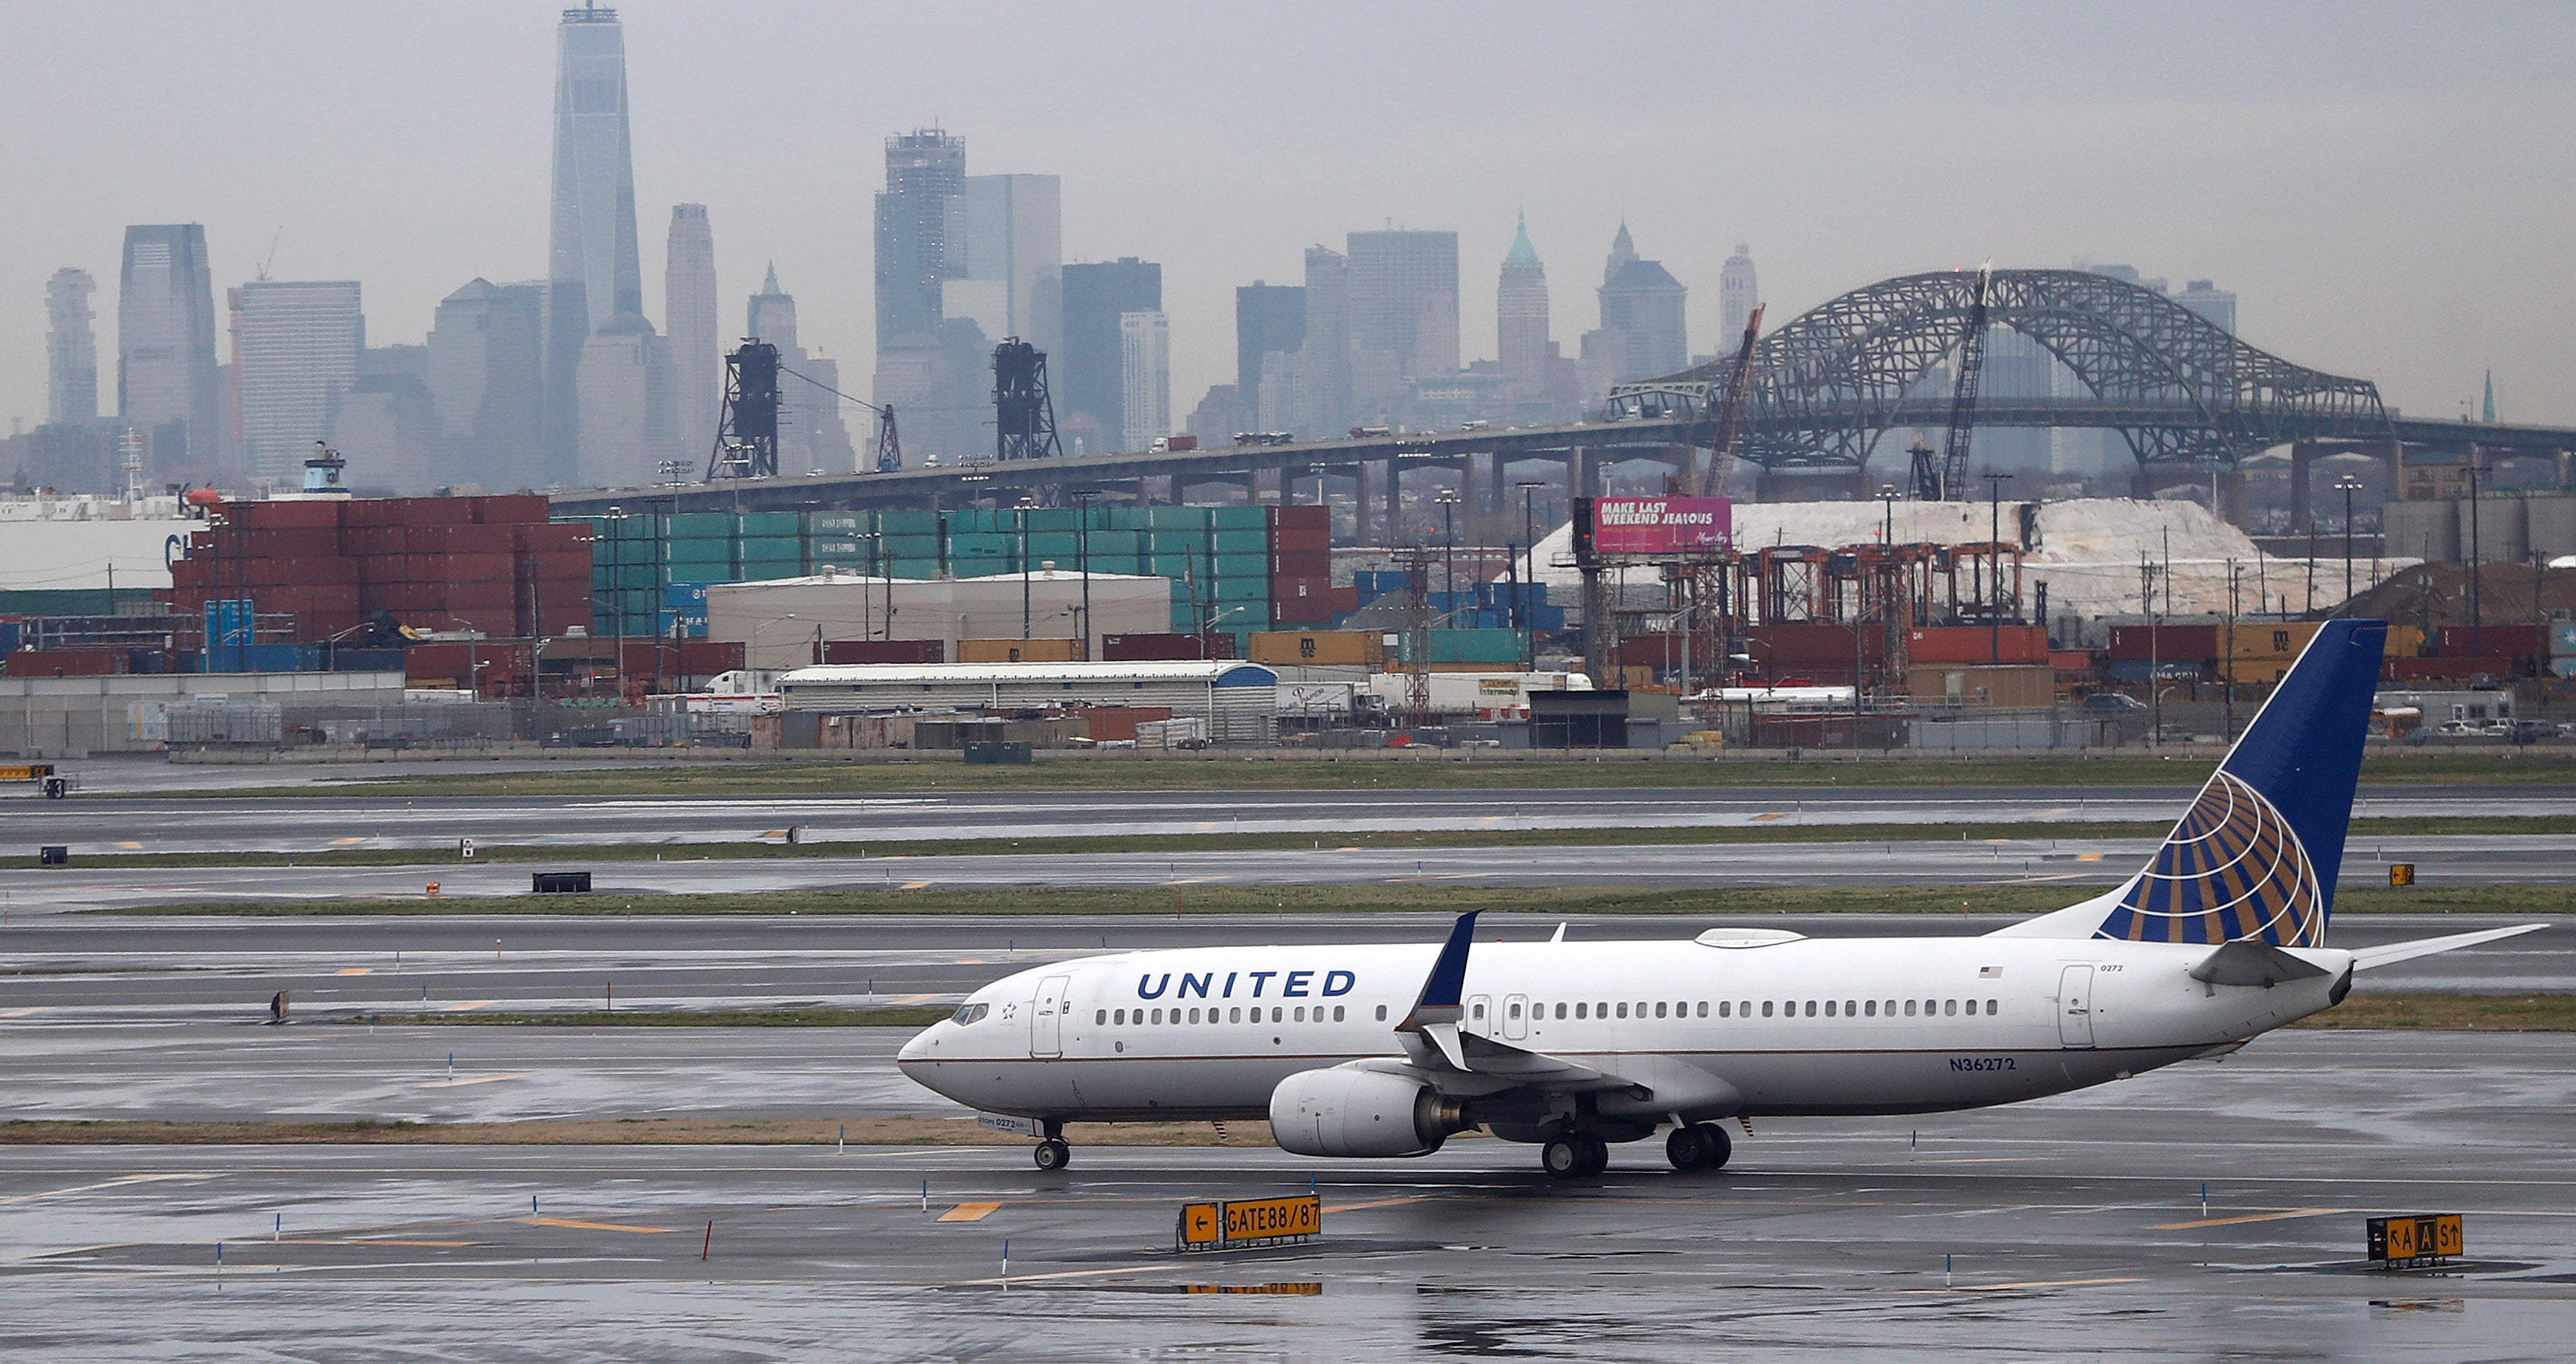 The New York City skyline gives backdrop to a United Airlines airplane taxing at Newark Liberty International Airport, Wednesday, April 12, 2017, in Newark, N.J. (AP Photo/Julio Cortez, file) 